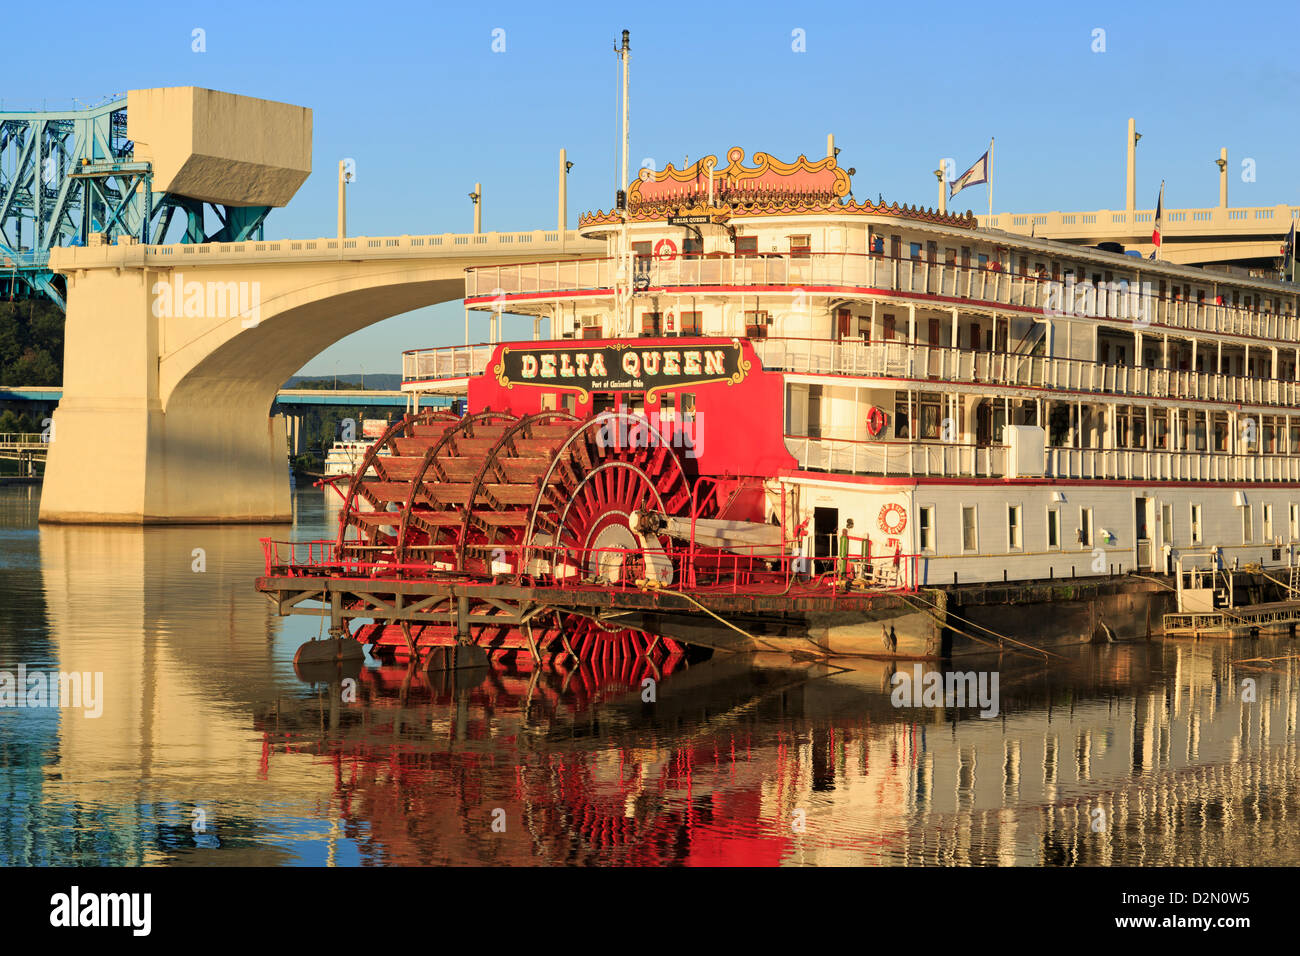 https://c8.alamy.com/comp/D2N0W5/delta-queen-riverboat-and-market-street-bridge-chattanooga-tennessee-D2N0W5.jpg